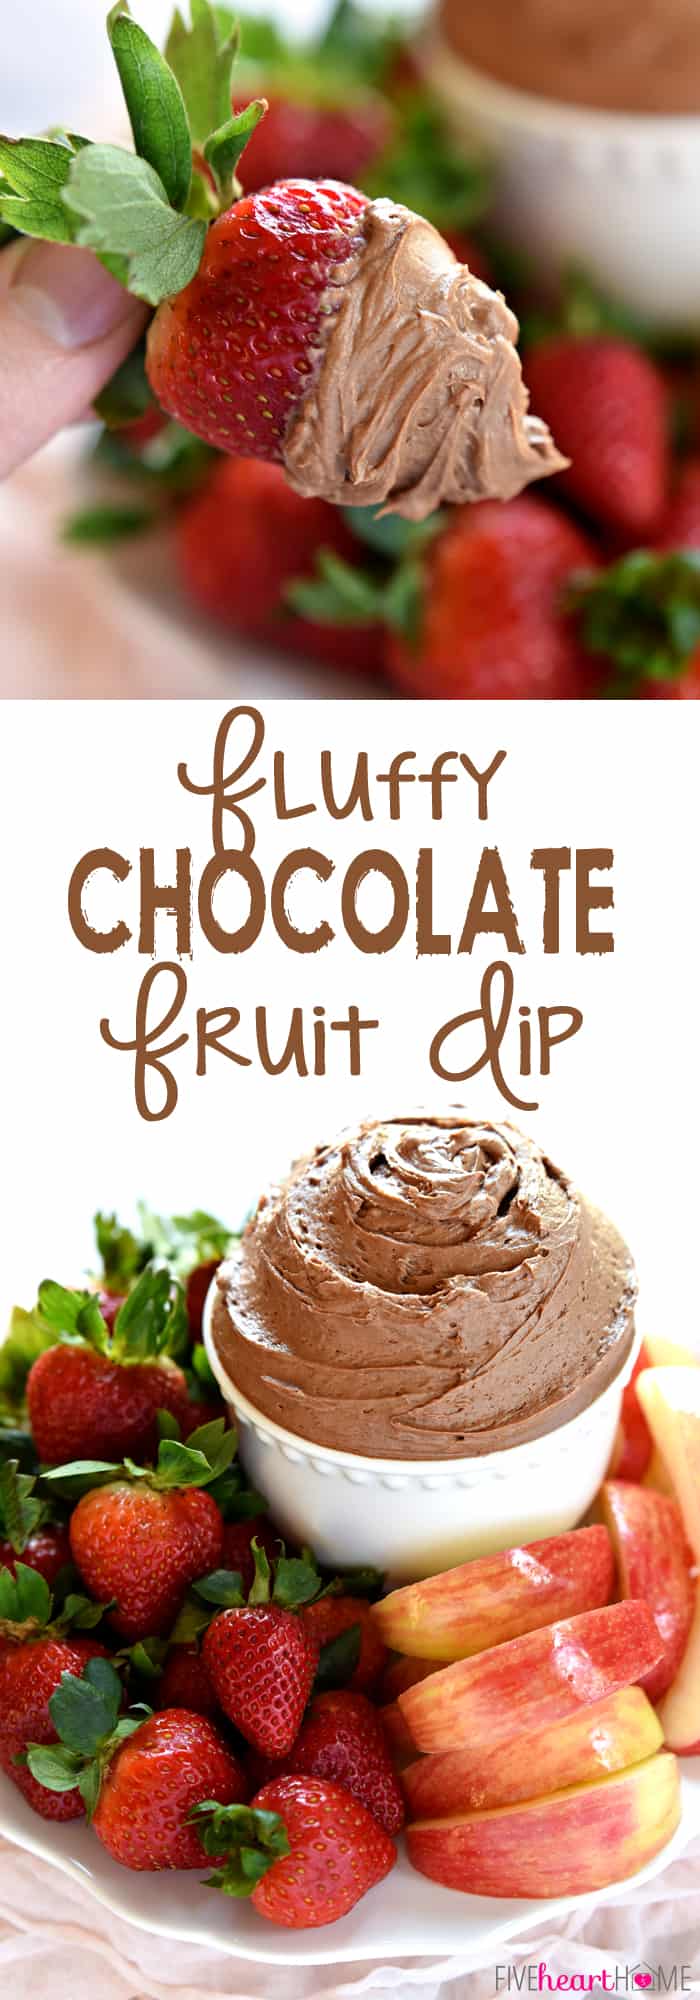 Fluffy Chocolate Fruit Dip ~ made with cream cheese, melted chocolate, and real whipped cream, this dessert tastes just like dipping fresh fruit into chocolate cheesecake! | FiveHeartHome.com via @fivehearthome